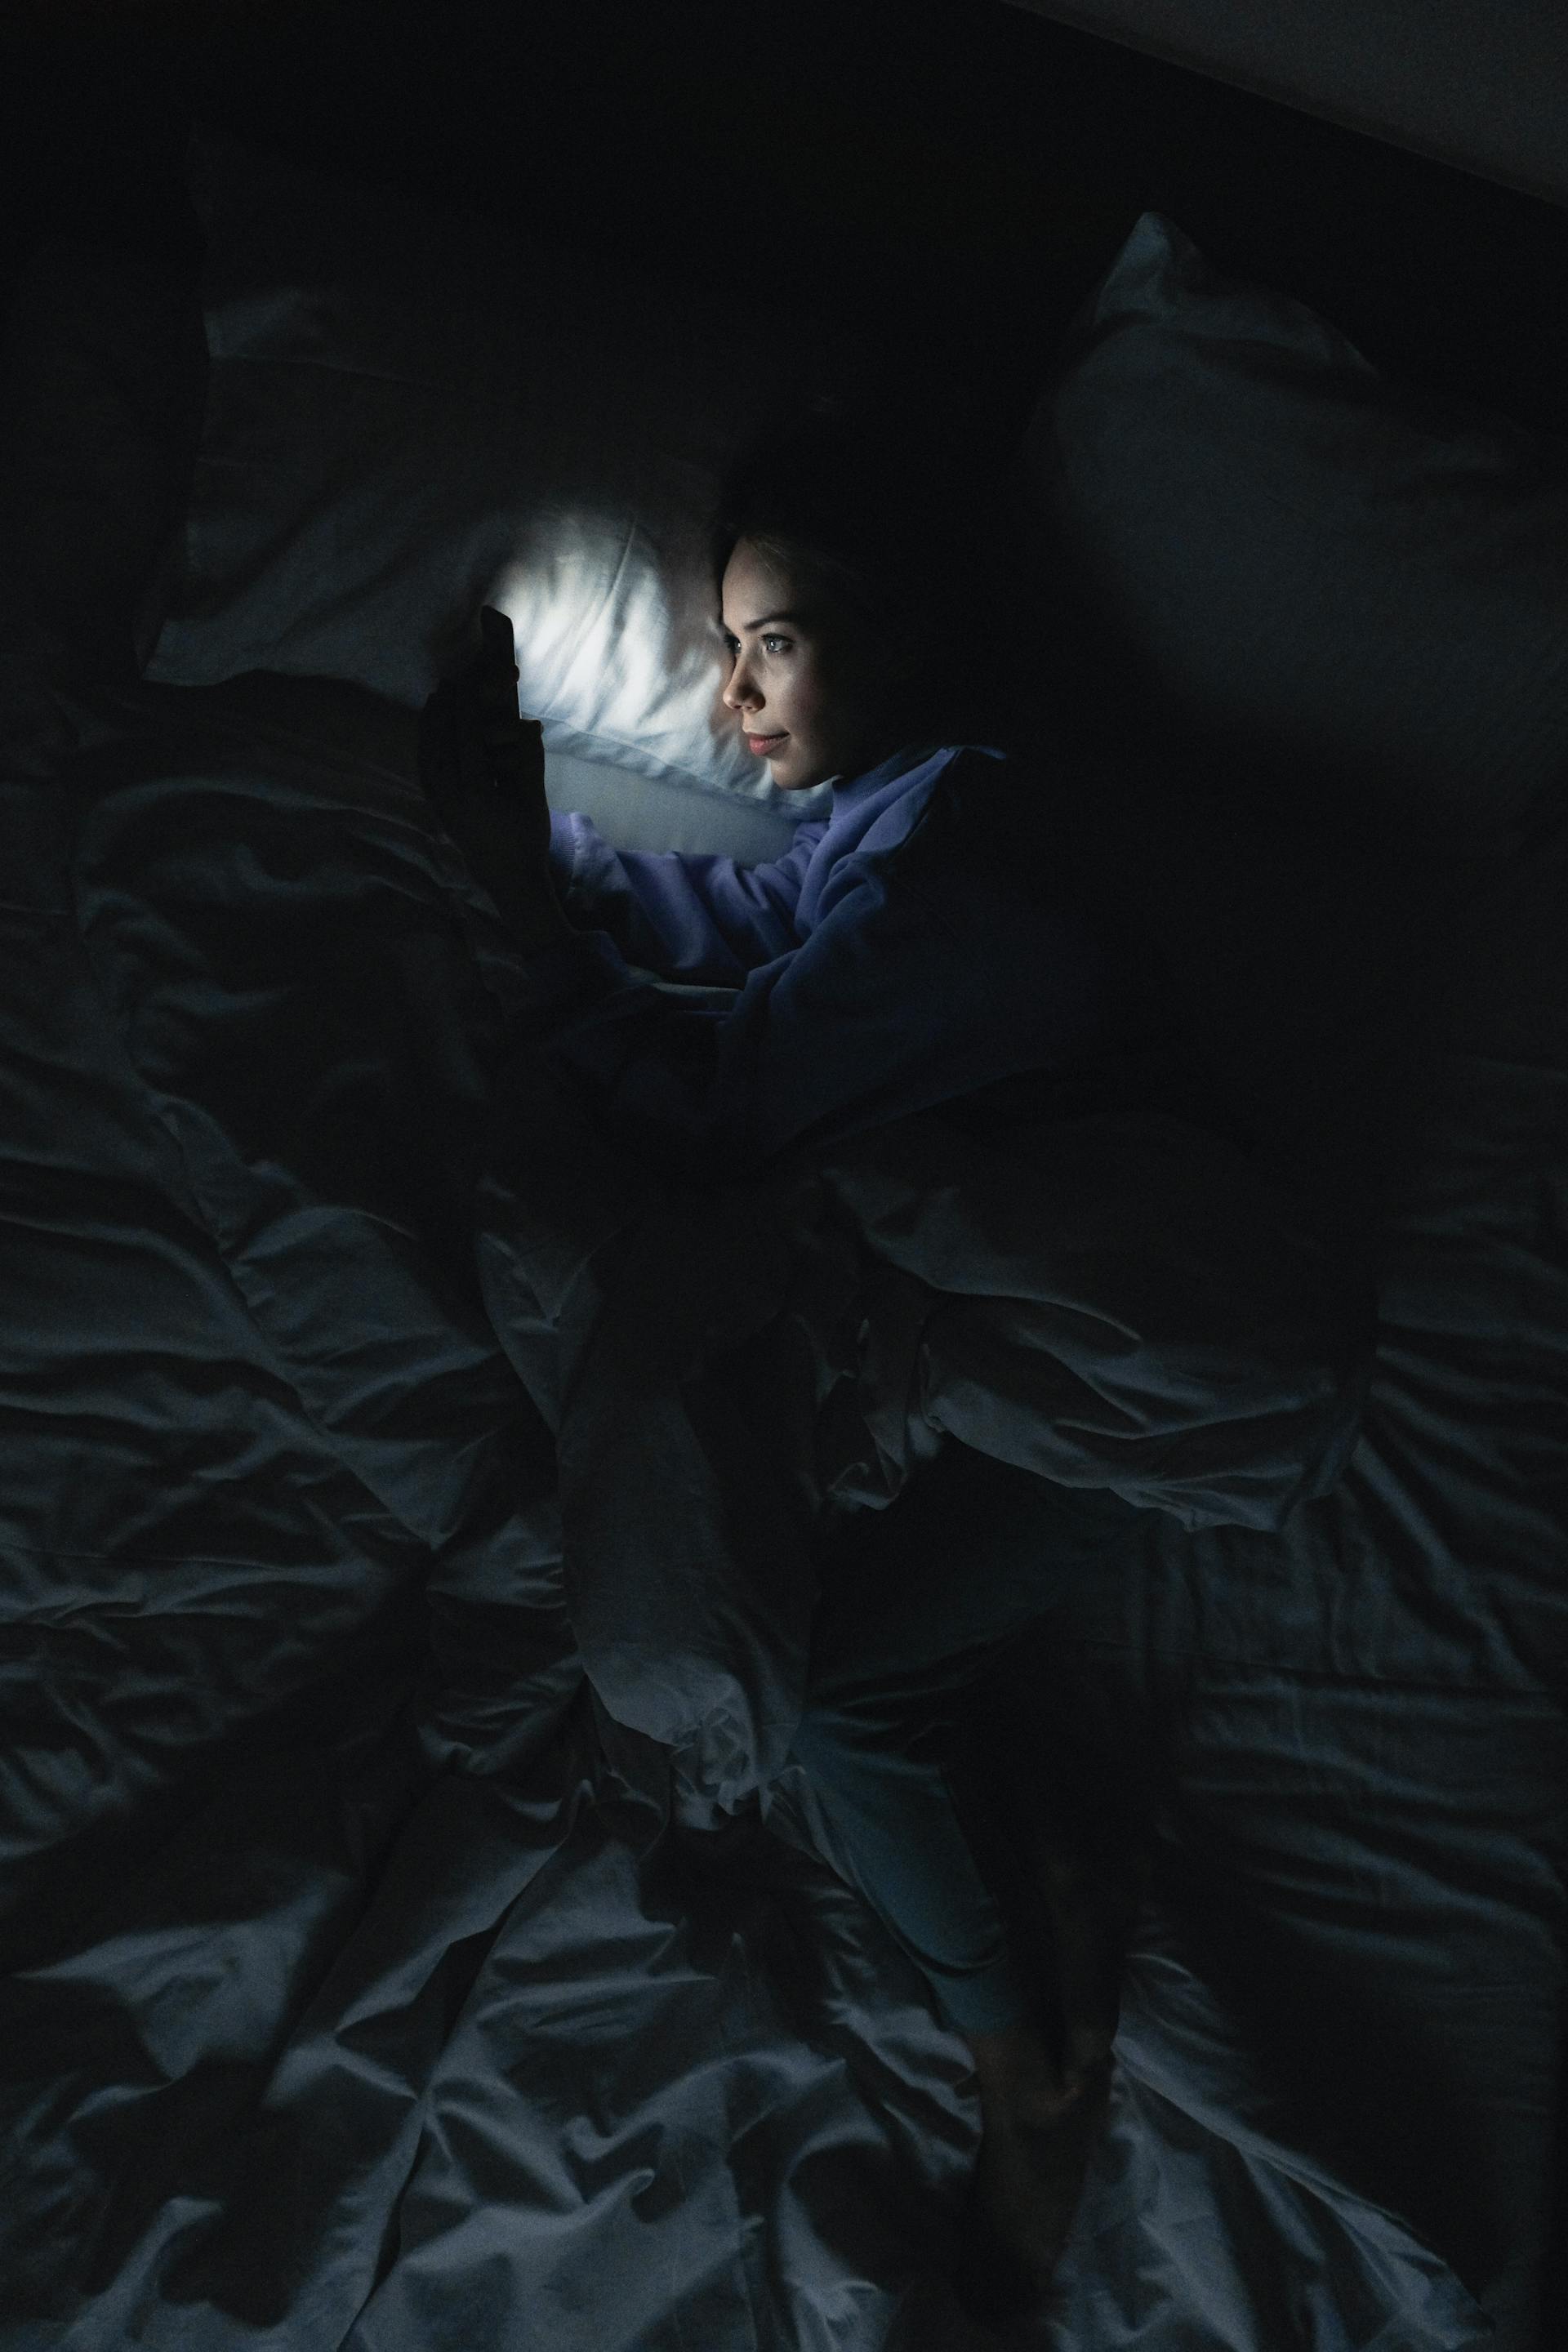 A woman using her phone in bed | Source: Pexels